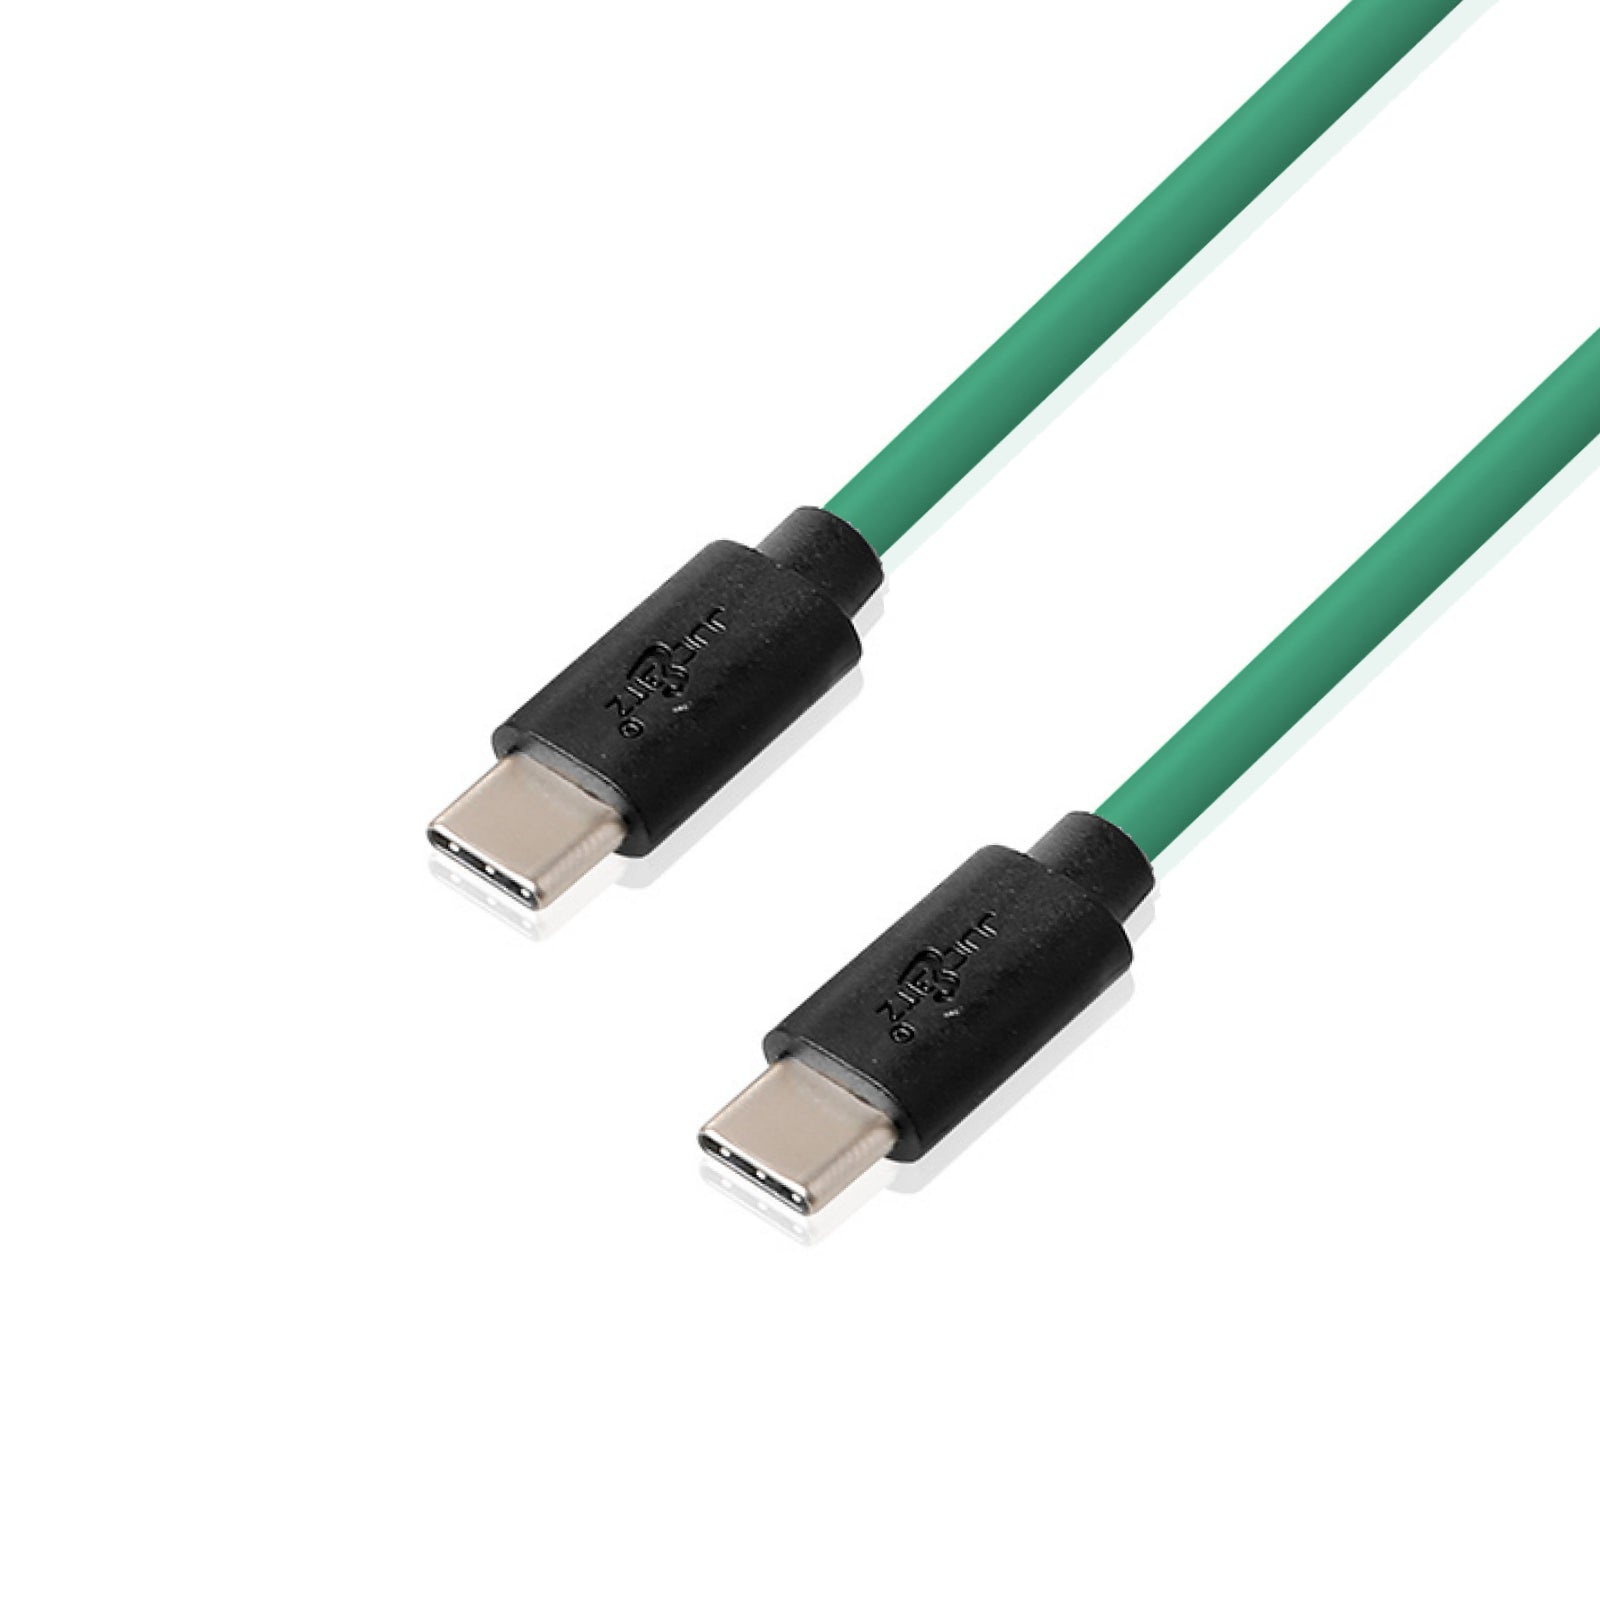 USB-C to USB-C 3A Charger Cable USB 2.0 Data Transfer Lead - Green